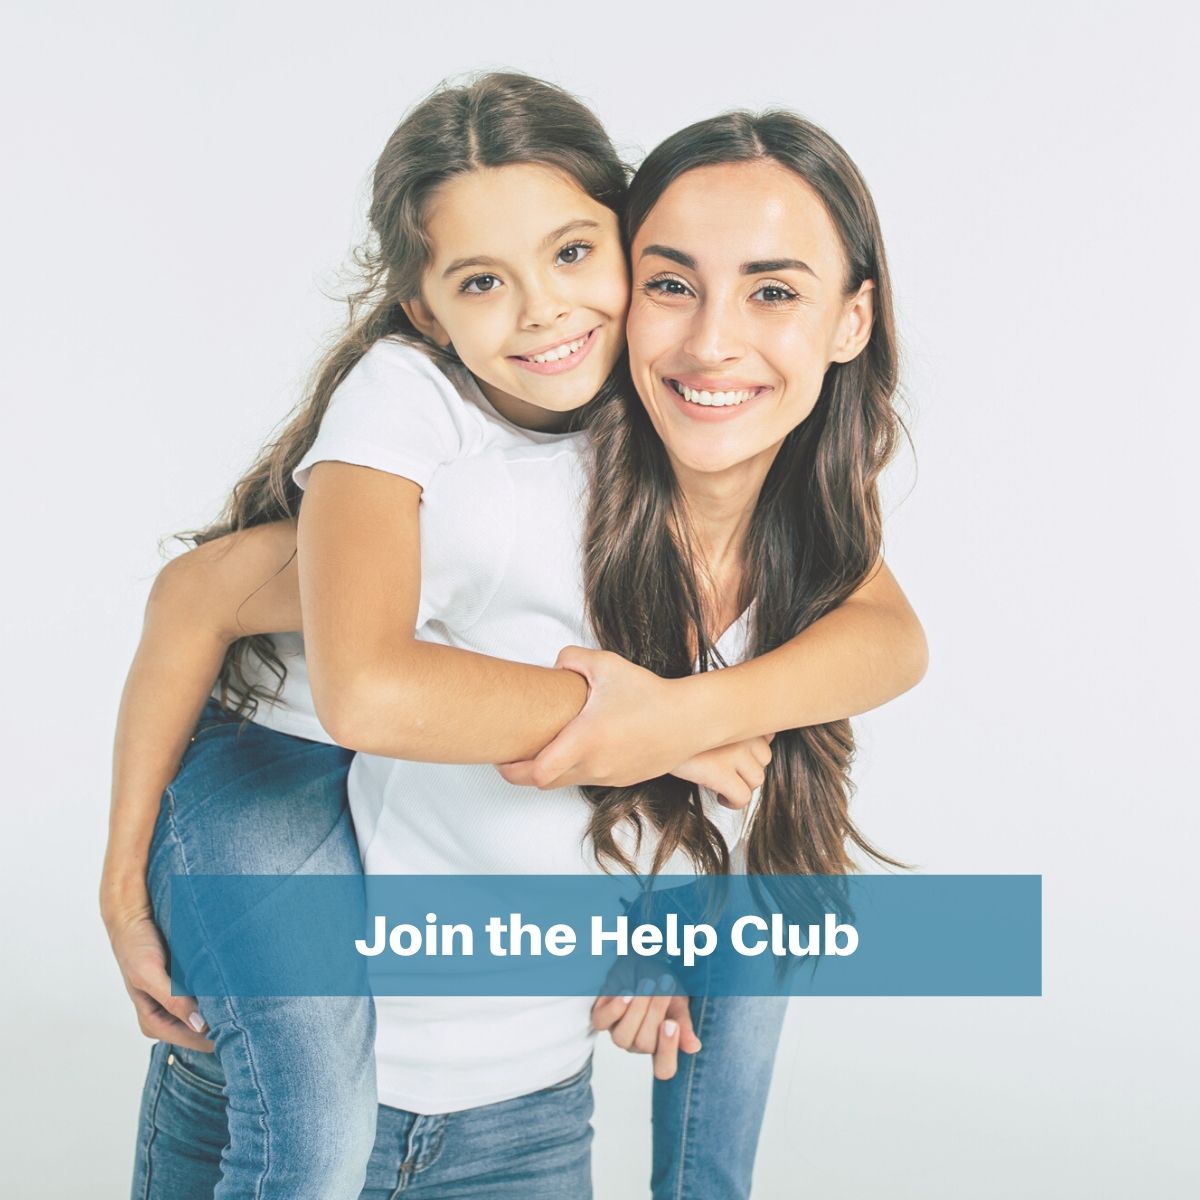 Join-the-Help-Club5 (1)